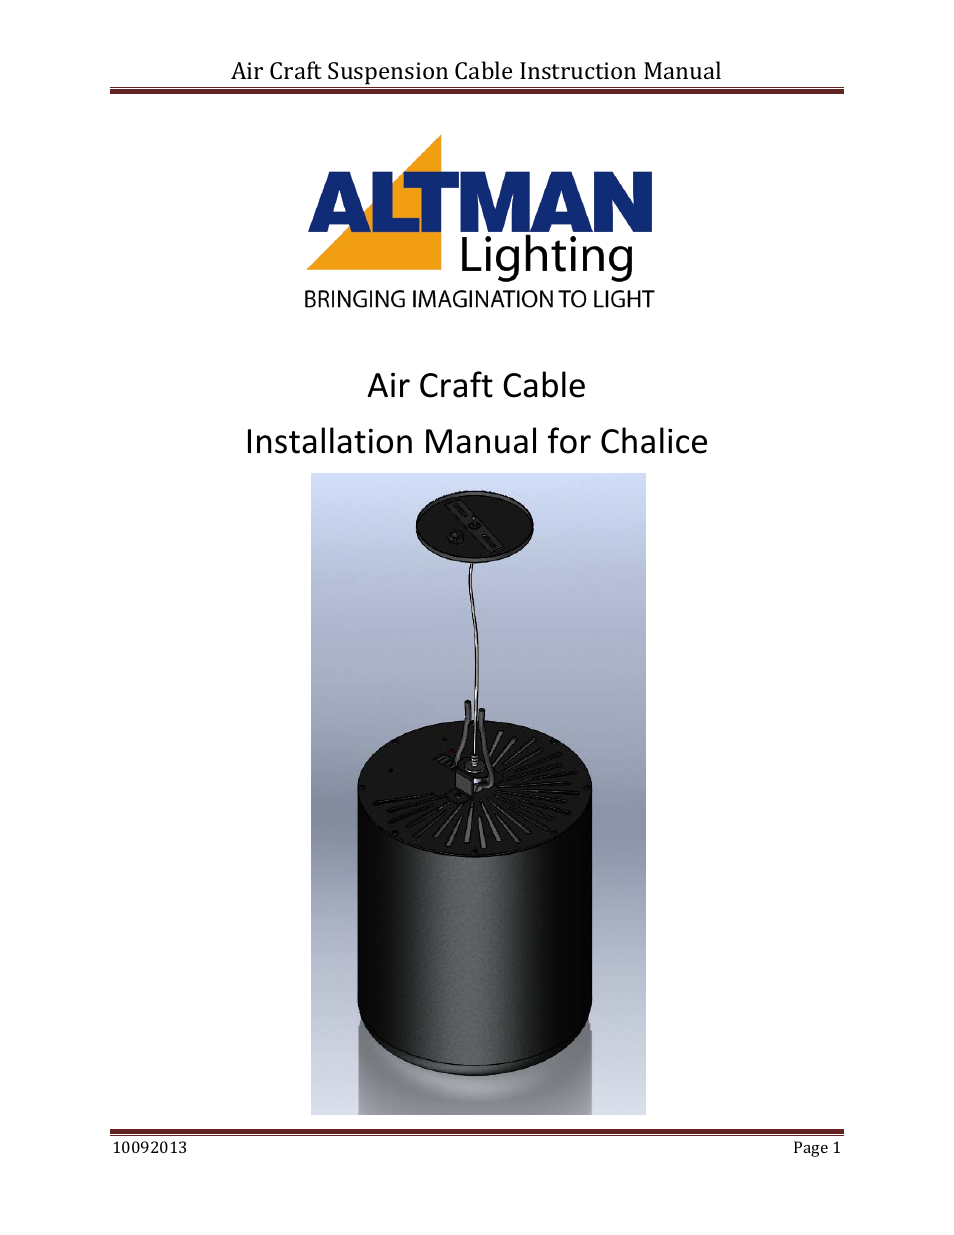 Chalice: Air Craft Cable